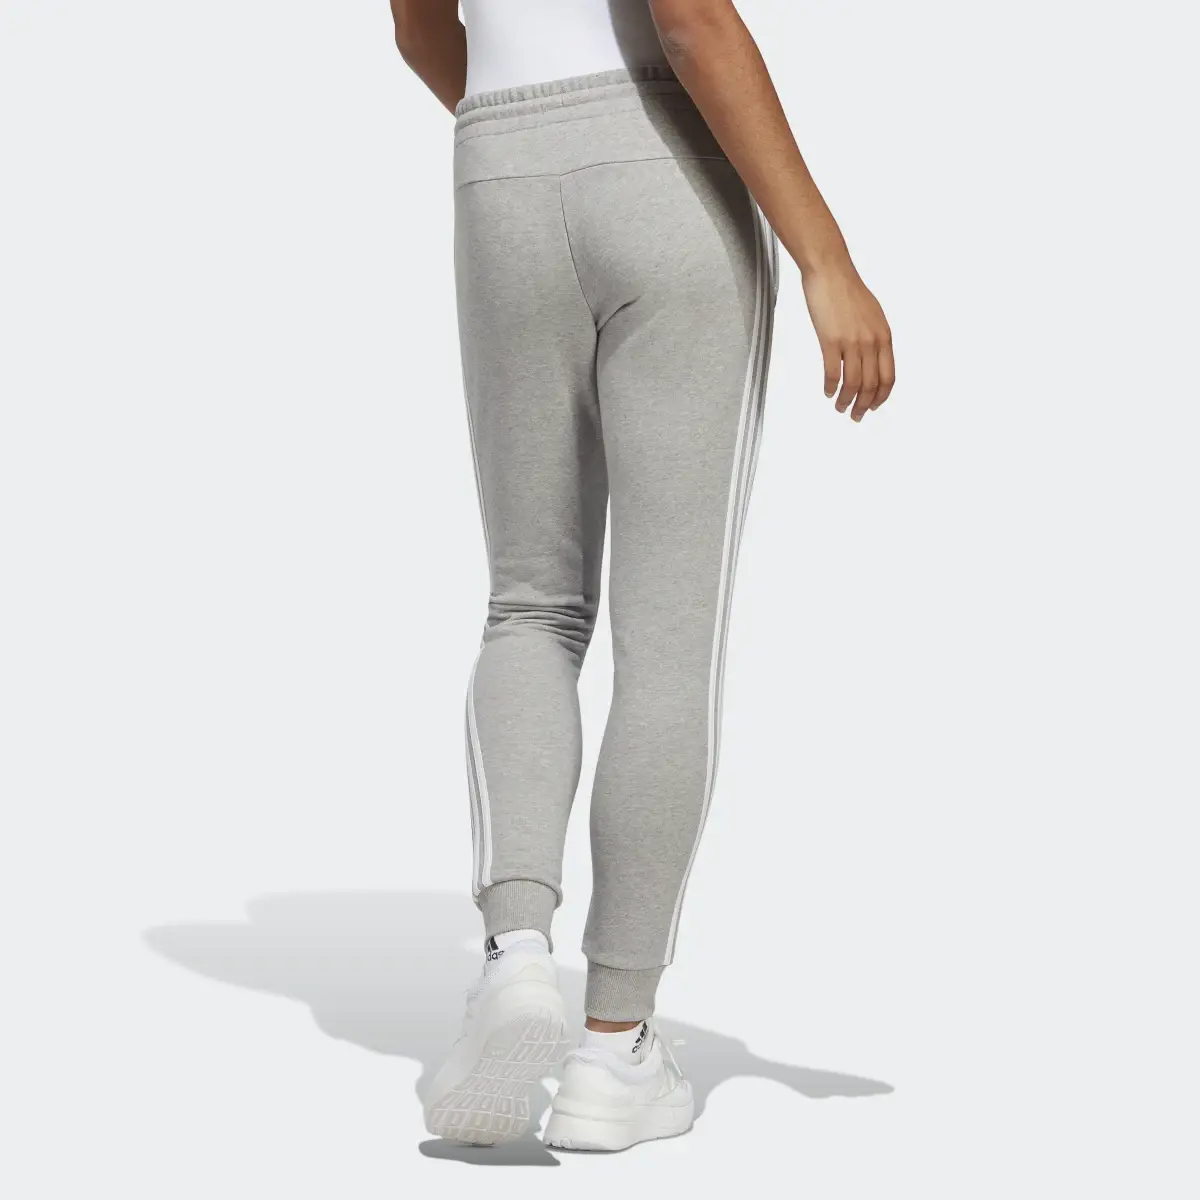 Adidas Essentials 3-Stripes French Terry Cuffed Joggers. 2